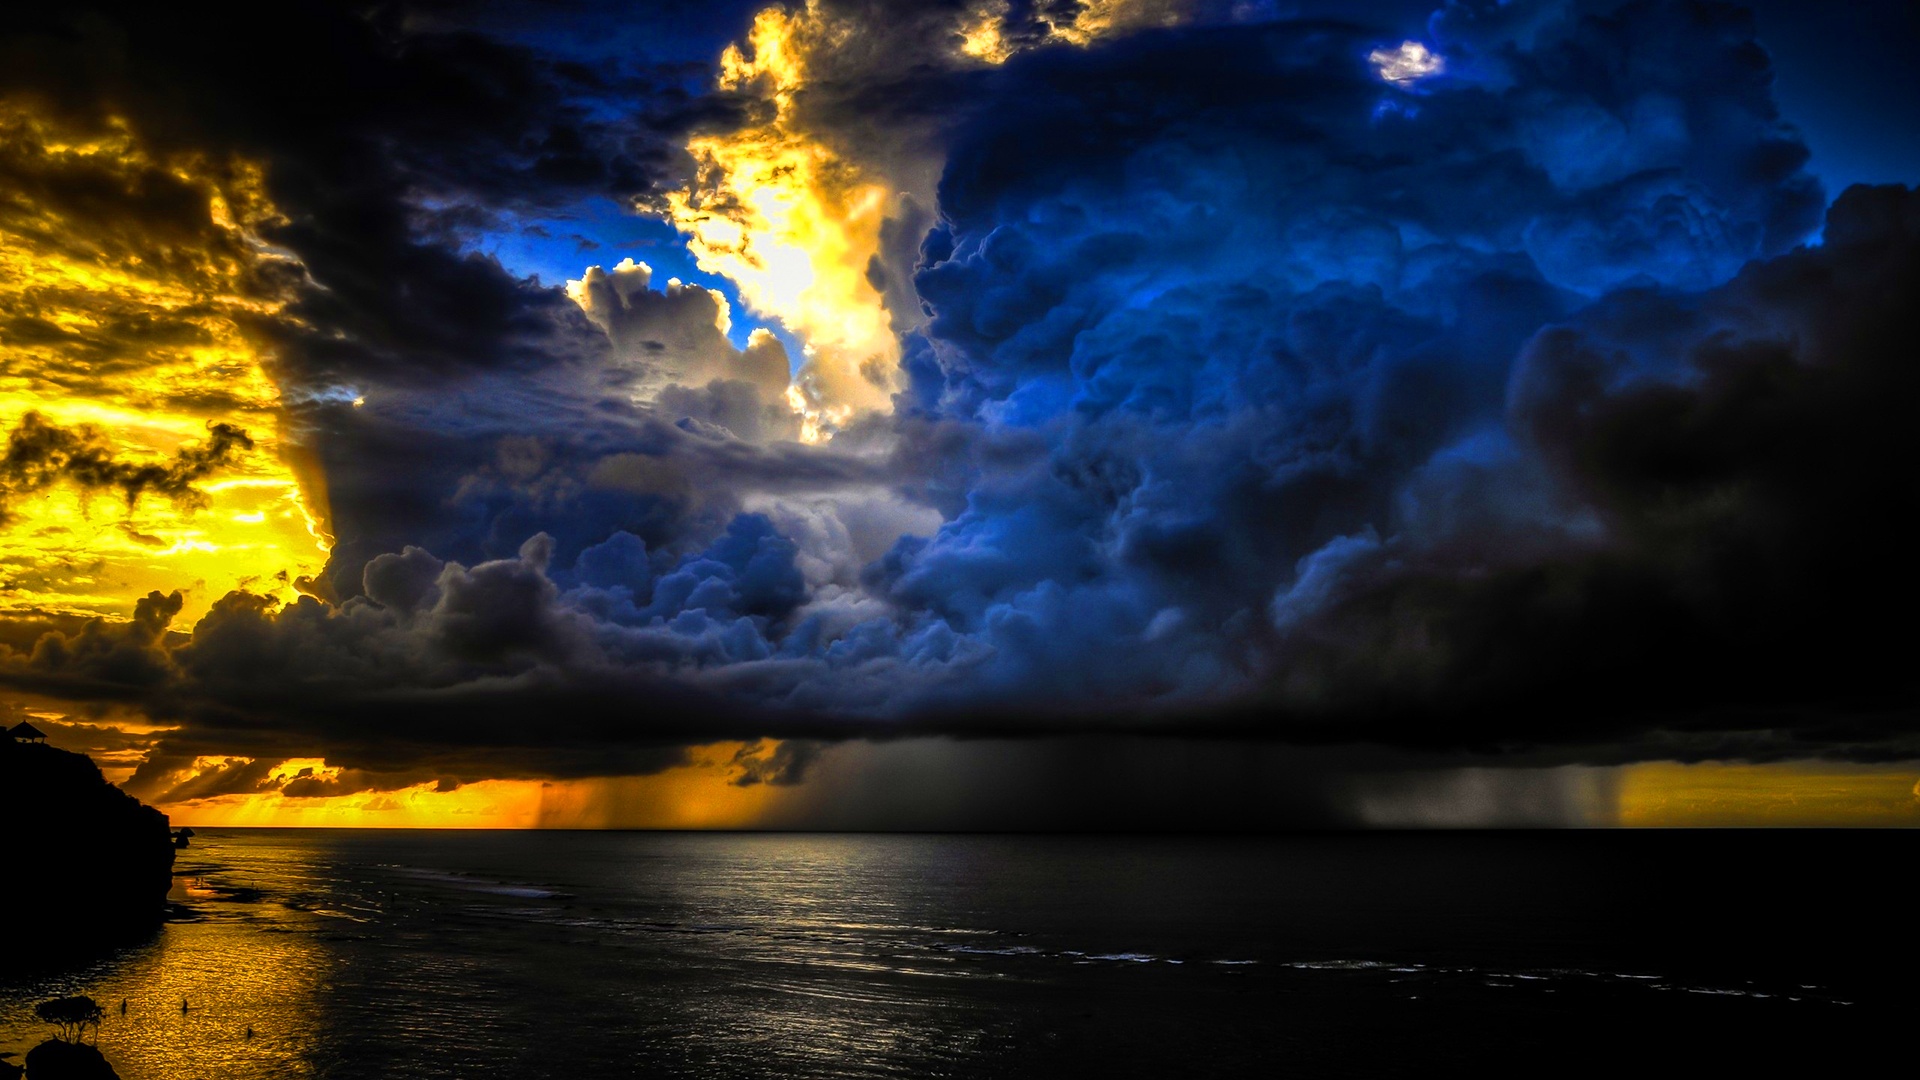 Storm Full HD Wallpaper High Definition Quality